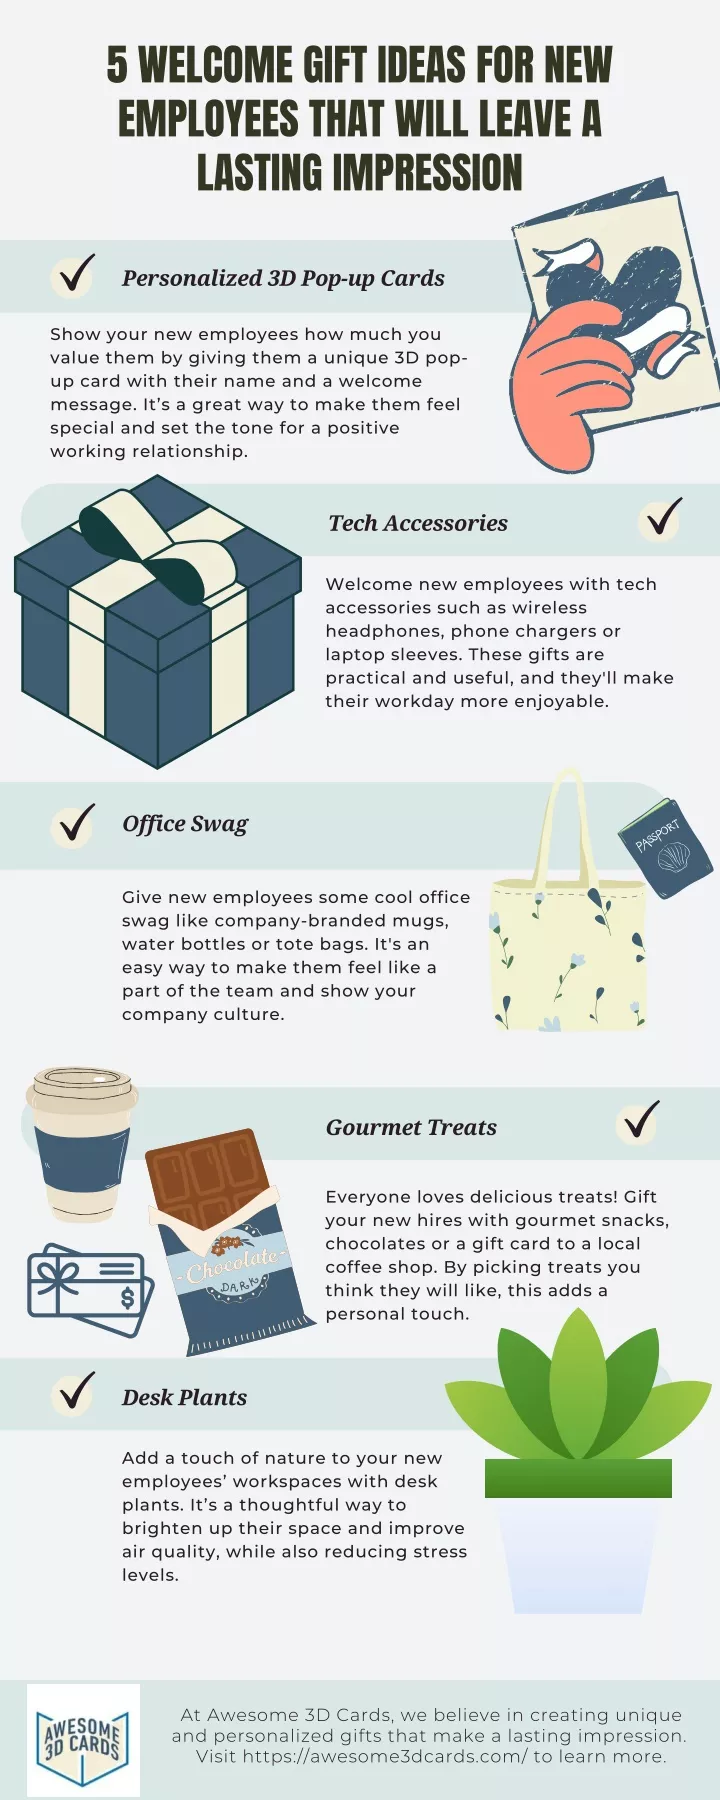 5 welcome gift ideas for new employees that will